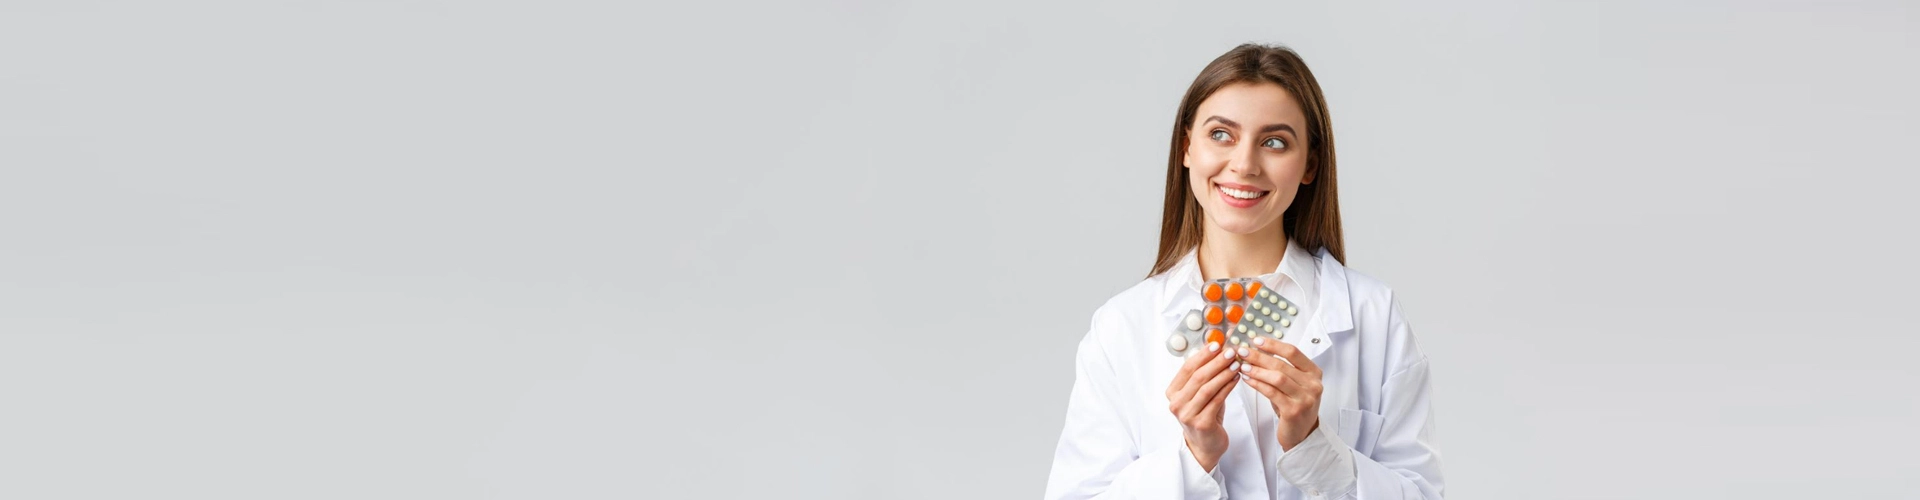 woman doctor holding pills and smiling